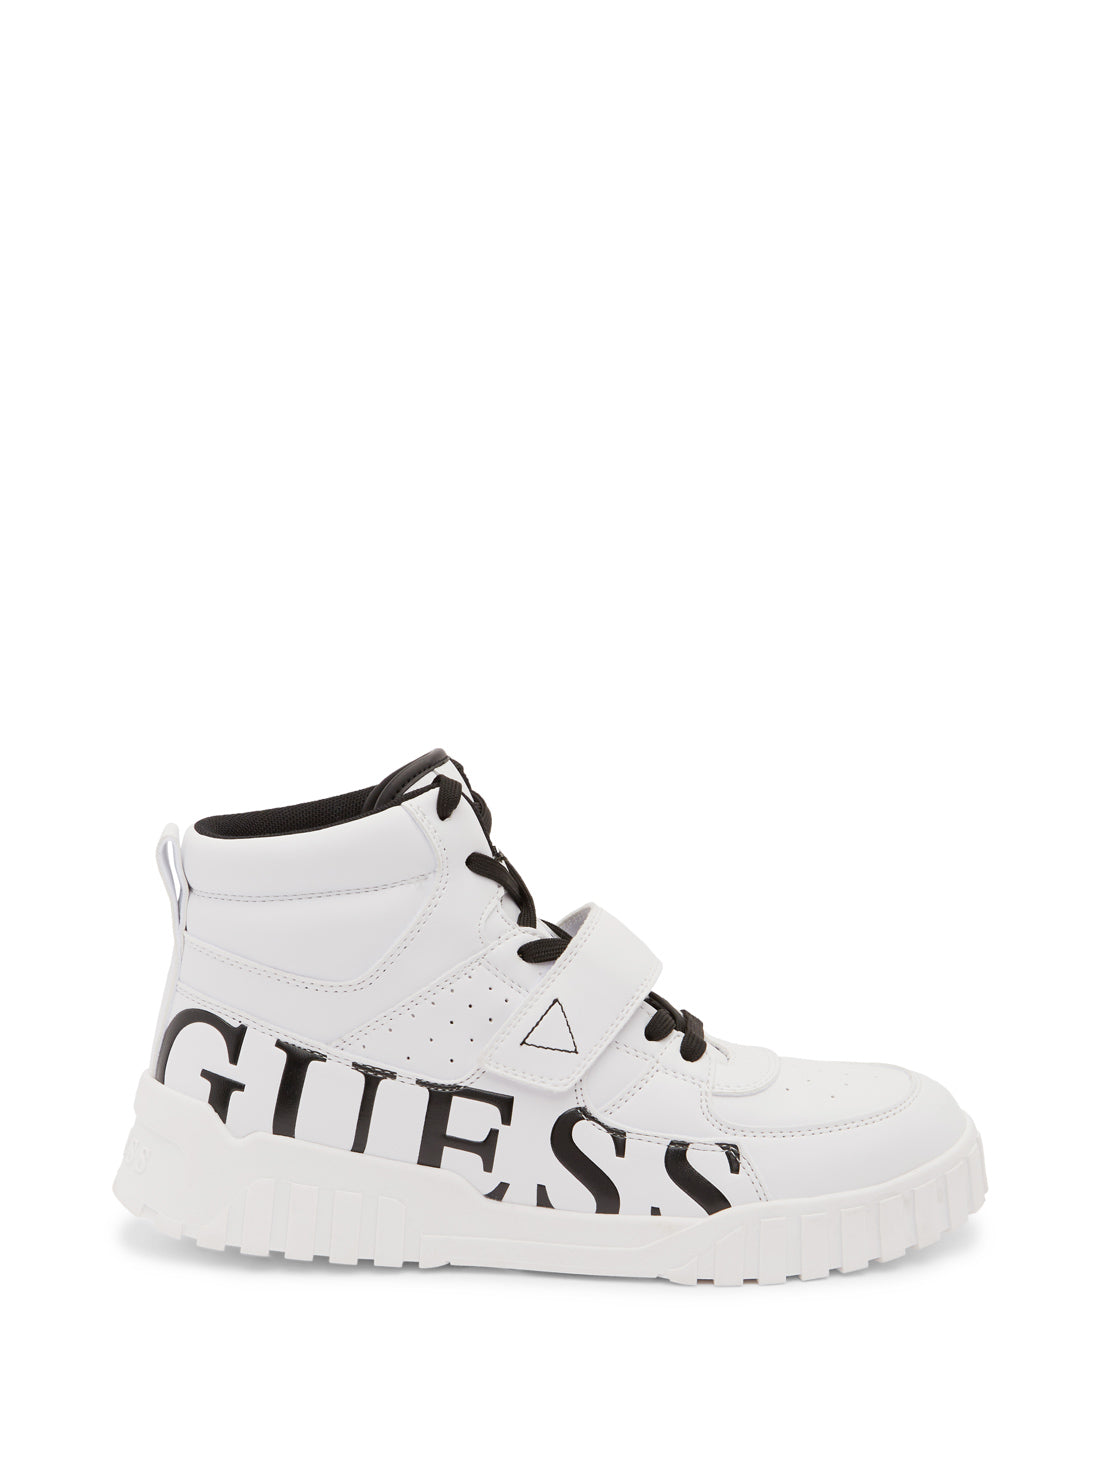 GUESS Men's White Rey High Top Sneakers REY Side View